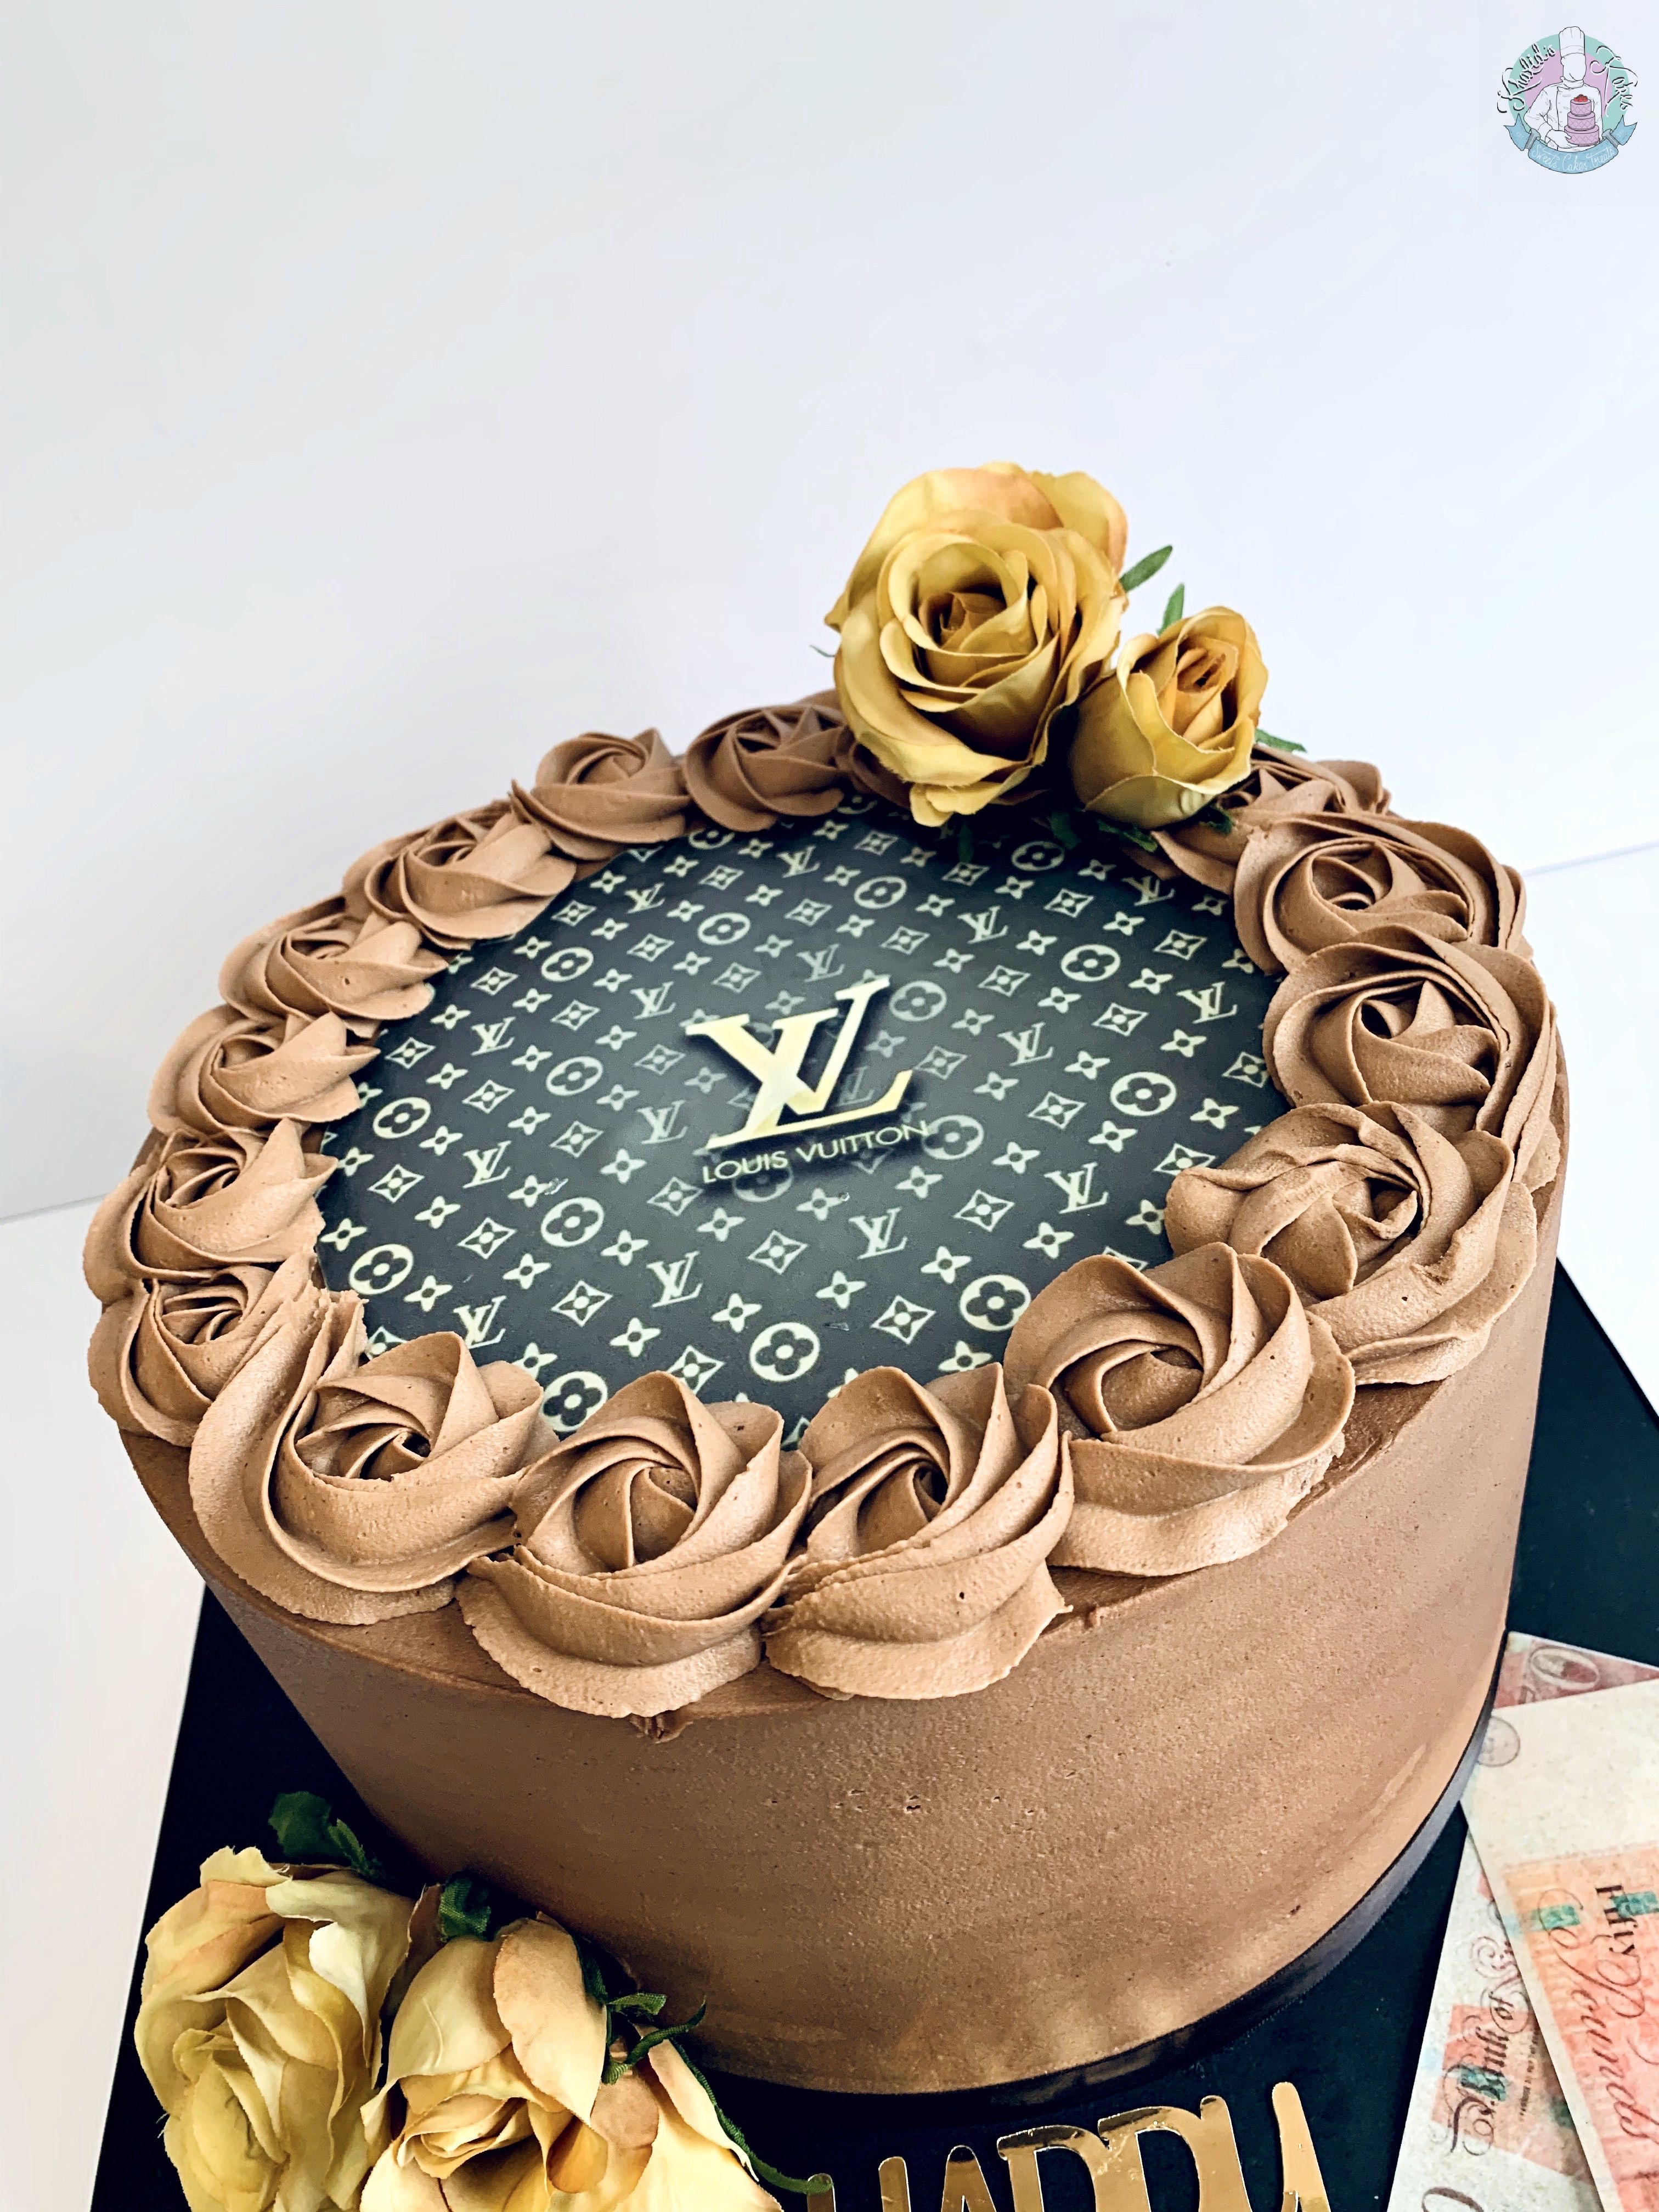 Khalids Kakes on X: A LV buttercream cake with a rich chocolate sponge and  ganache filling. Cute little cuppie to finish. #LVcake #expensive  #expensivetaste #designer #cake  / X